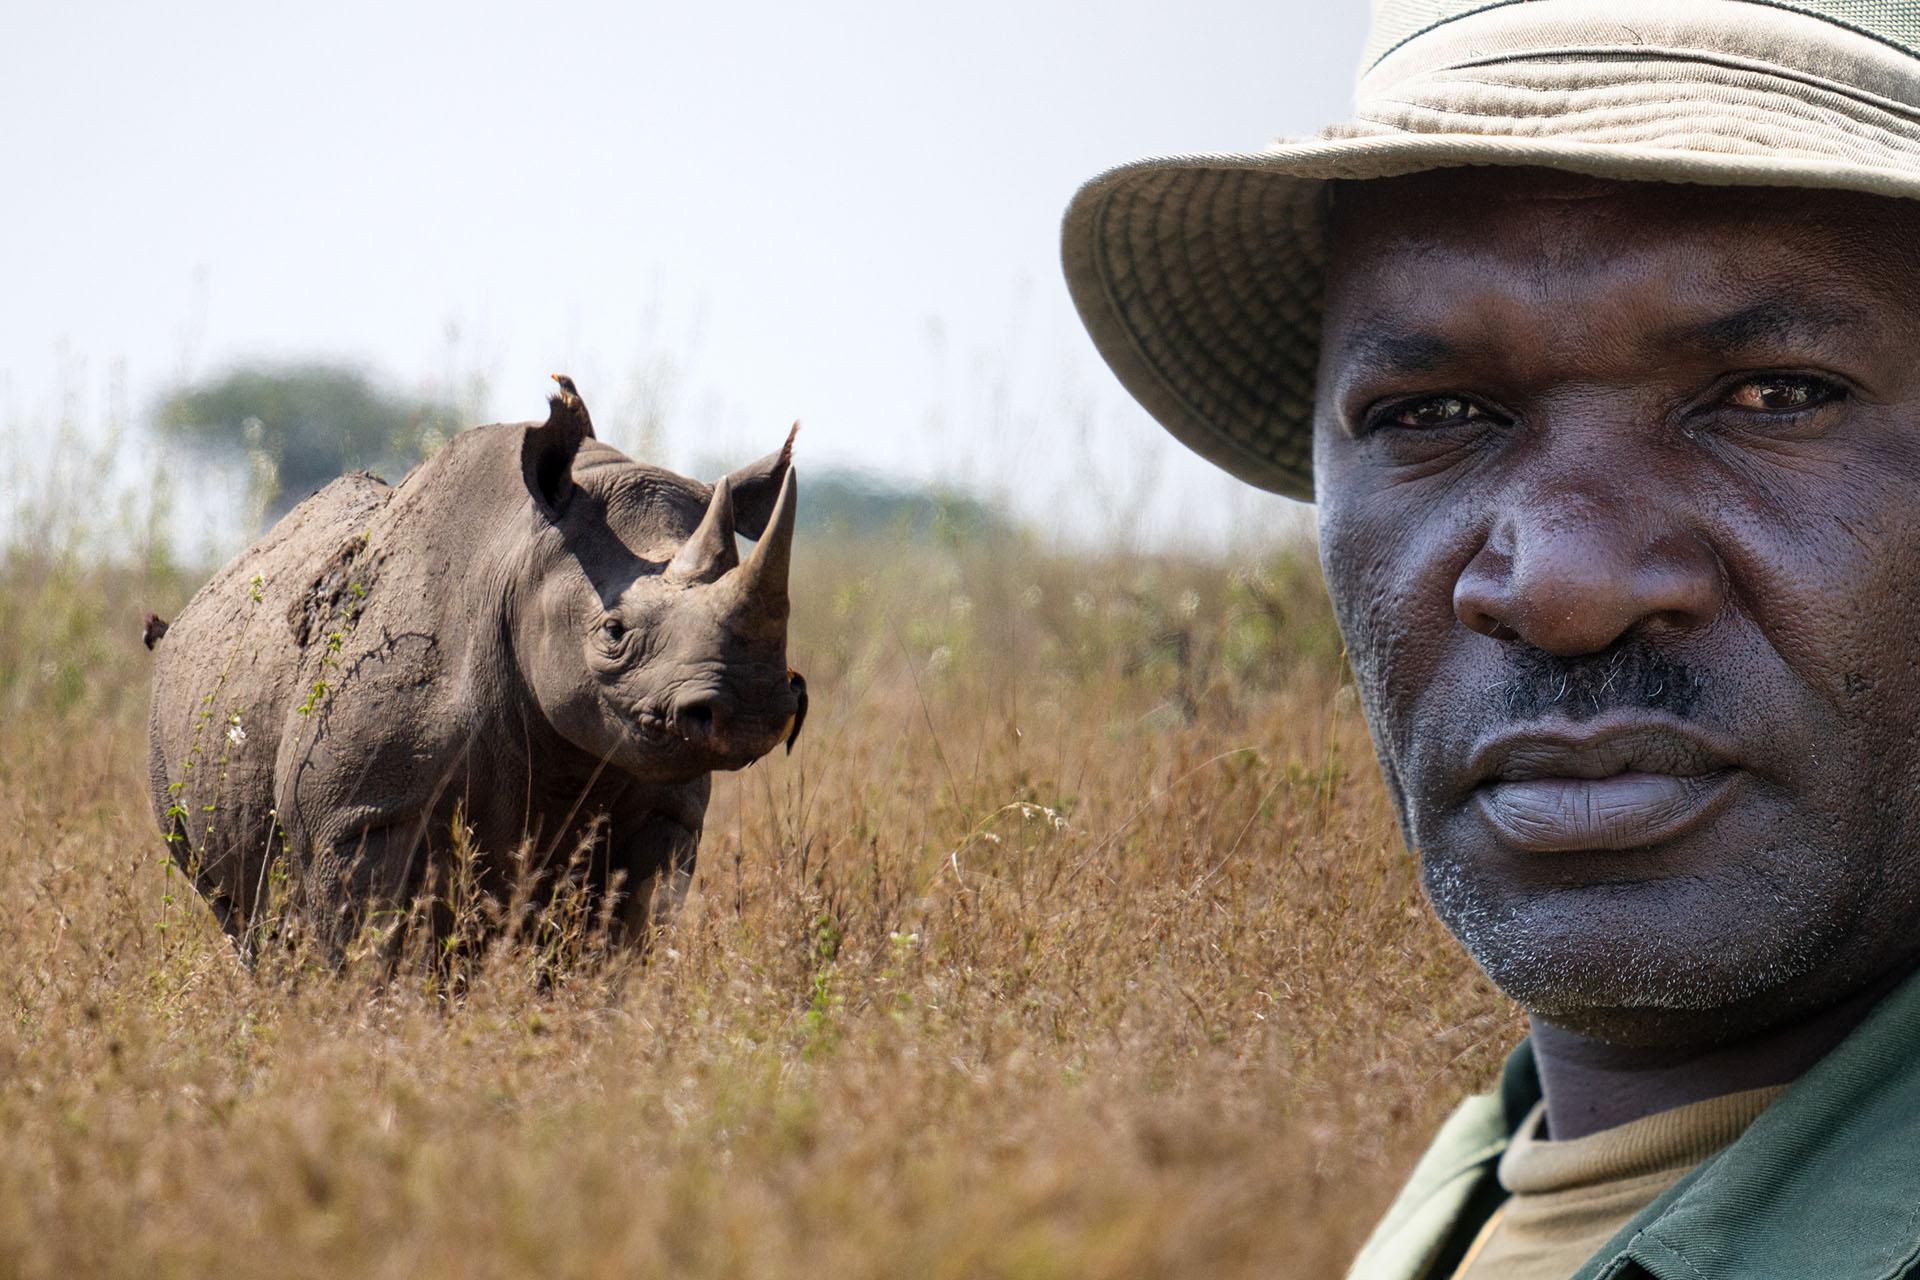 Malale Mwita was appointed head ranger in Moru Kopjes twenty years ago there were only three black rhinos in the area. Today, he says proudly, there are over fifty black rhinos breeding in the wild. 